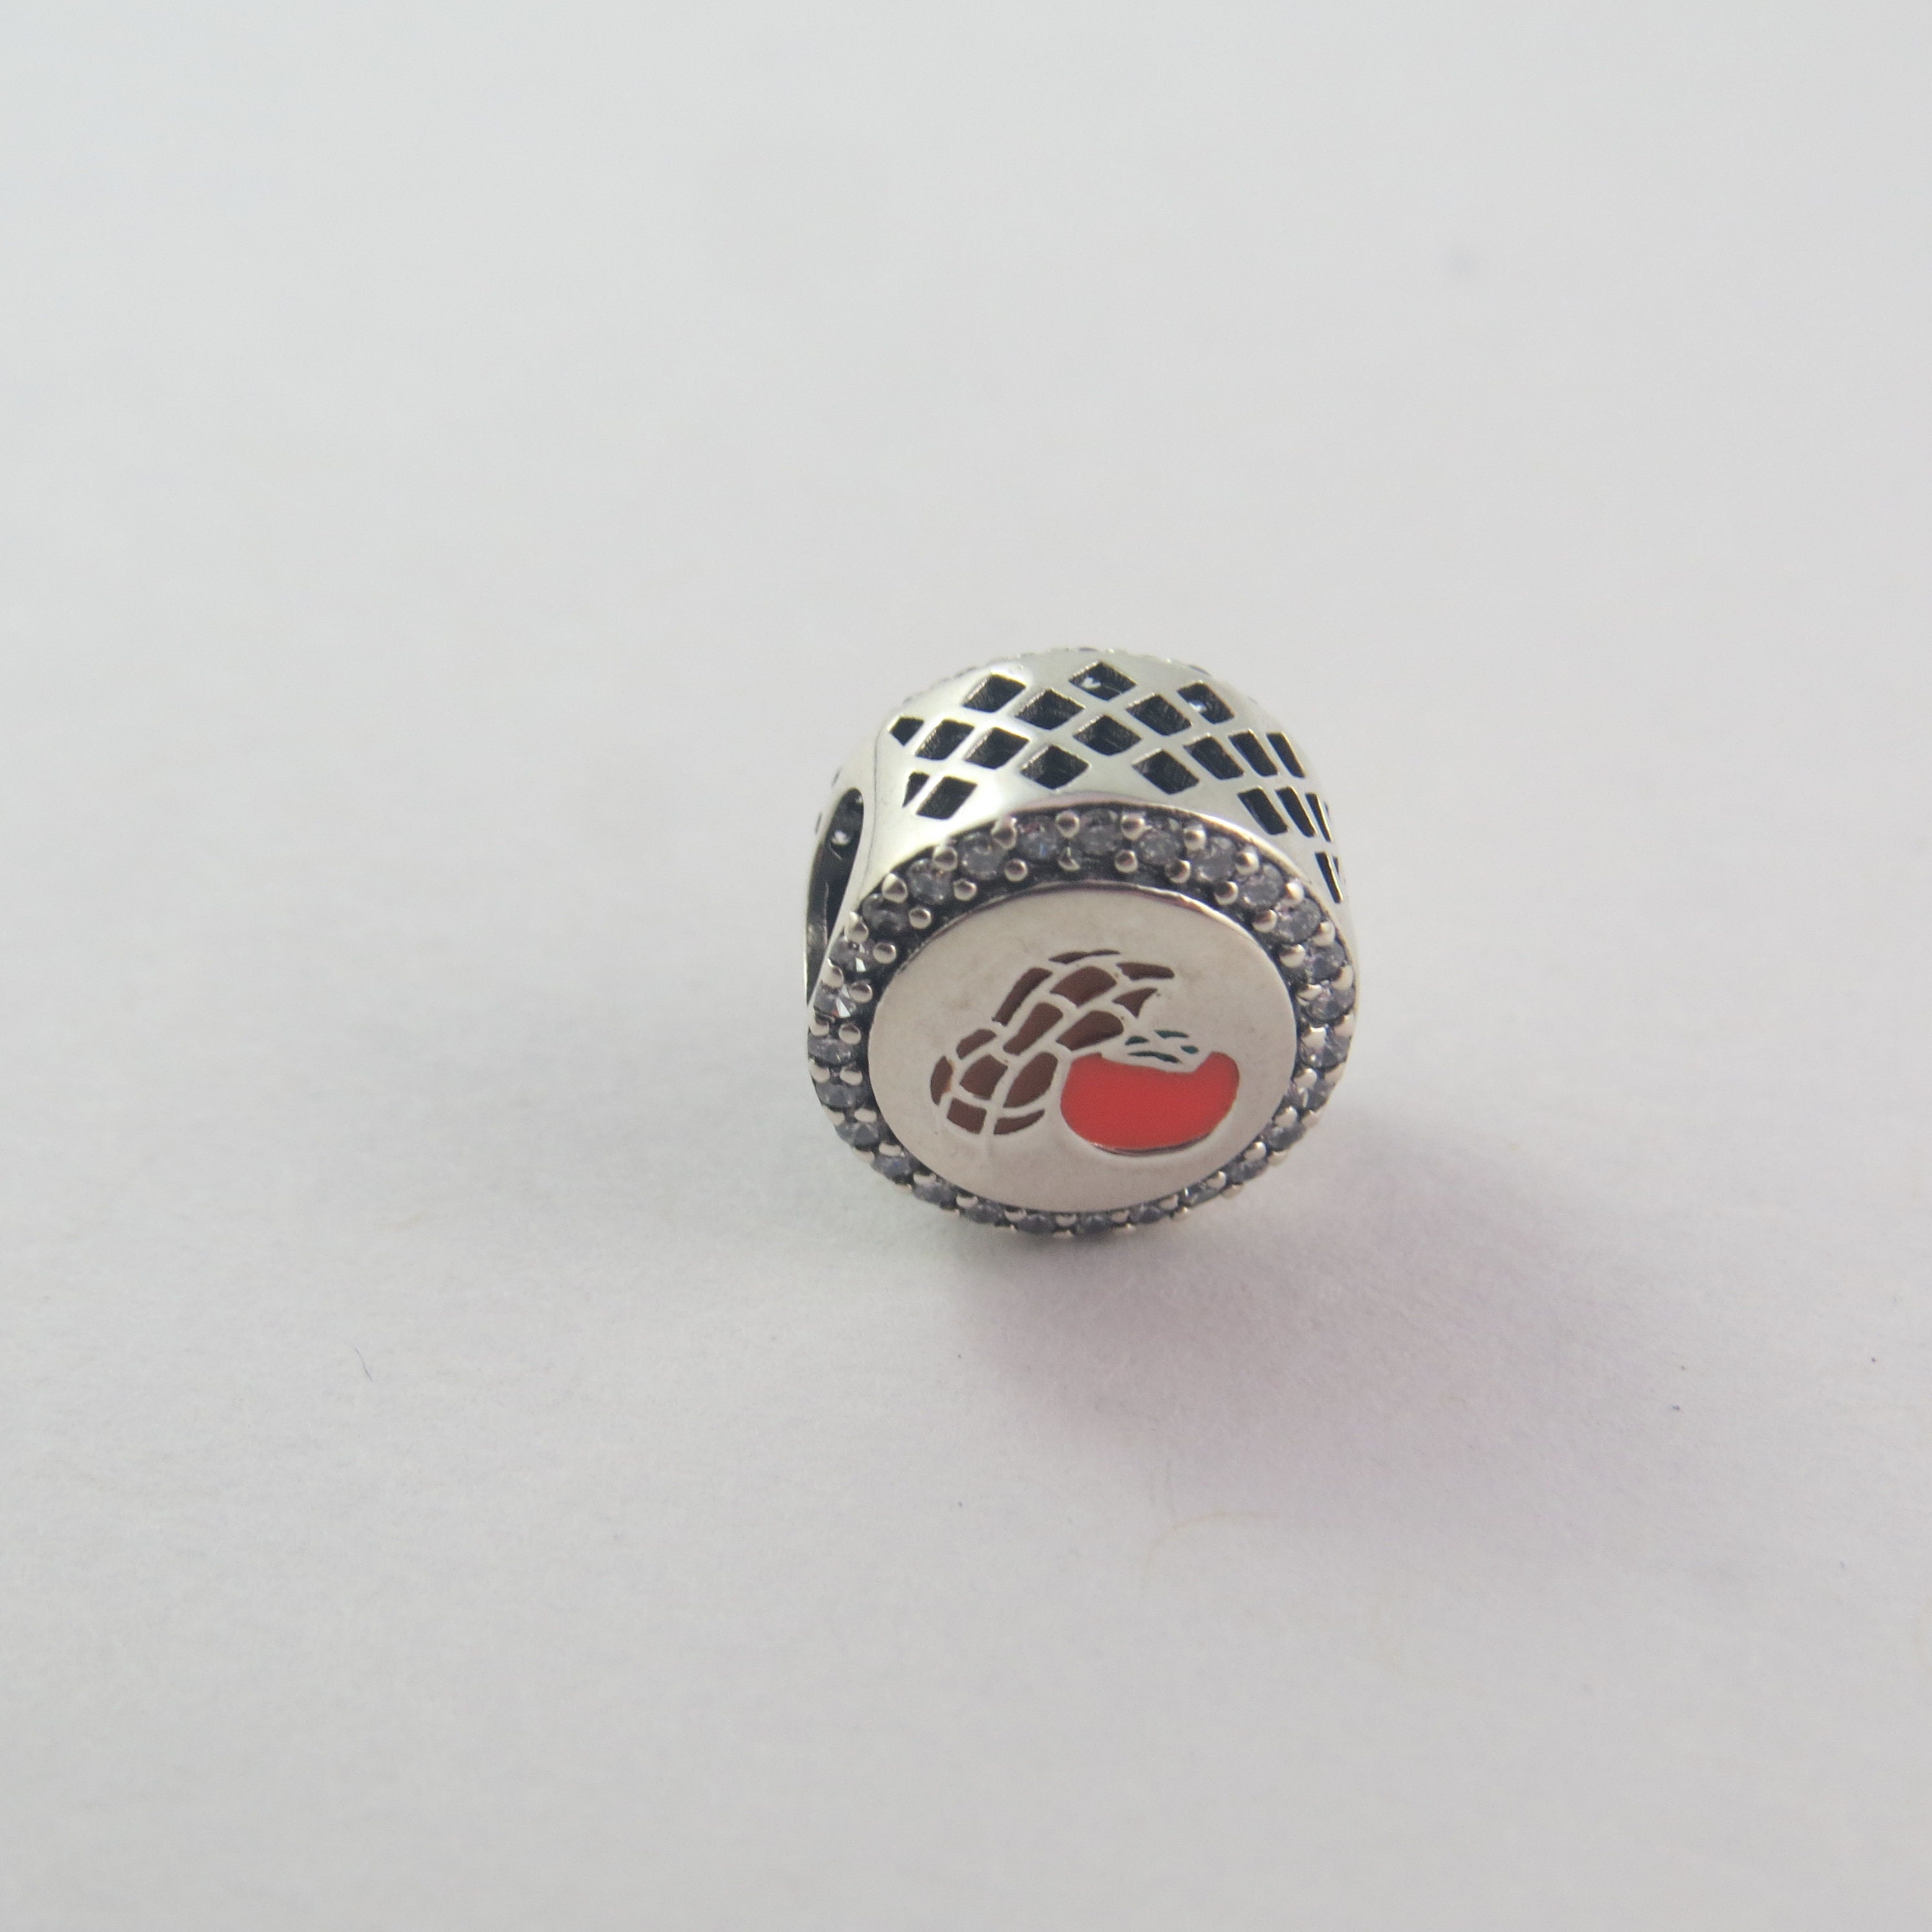 Good Luck Charm/lucky/s925 Ale Sterling Silver/pandora -